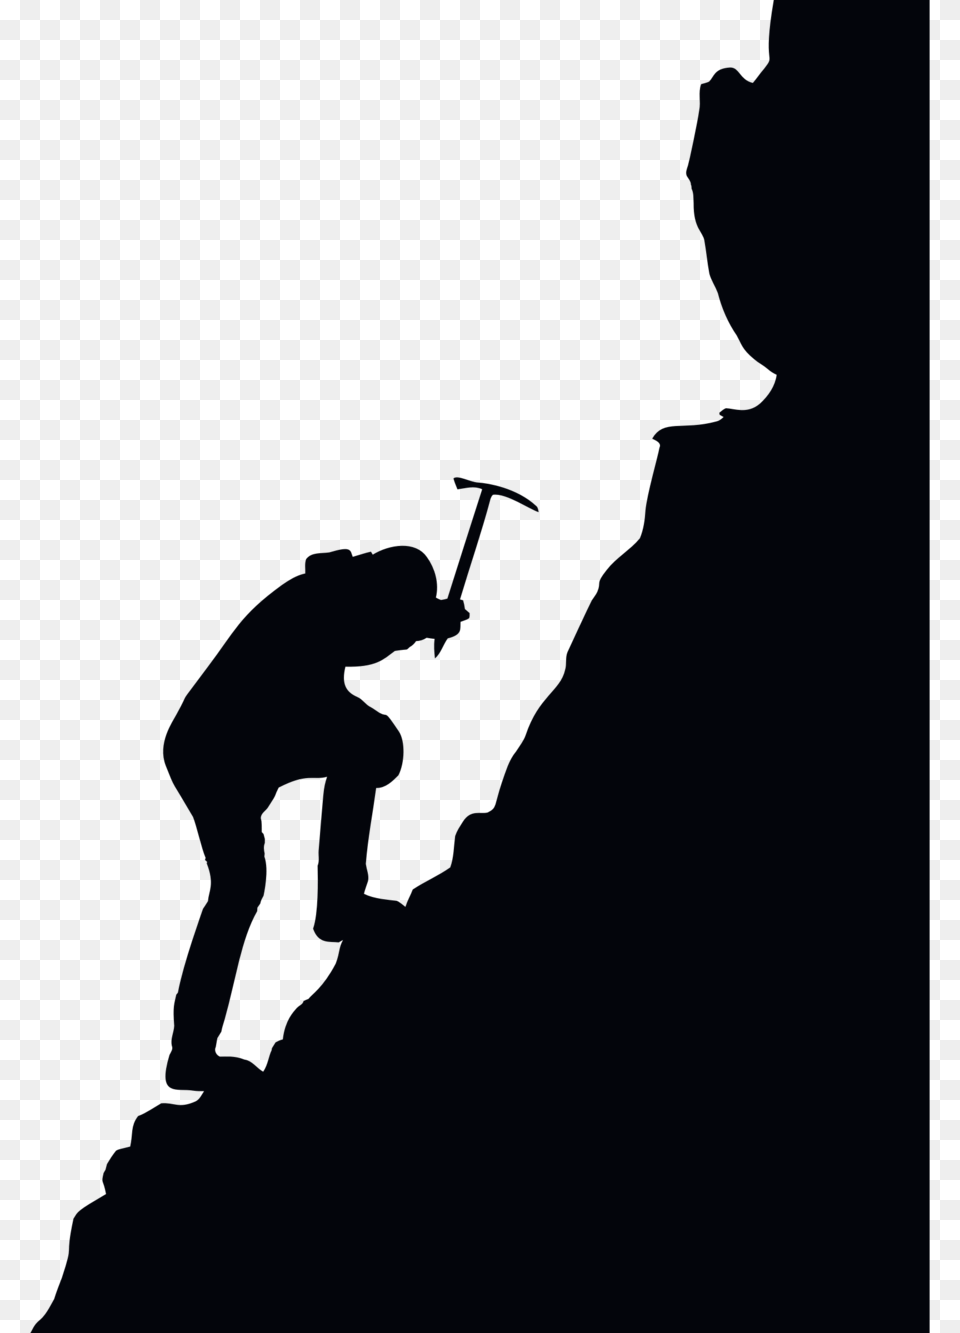 Mountaineering Silhouette Clipart Climbing Mountaineering, Outdoors, Nature, Person, Adventure Free Png Download